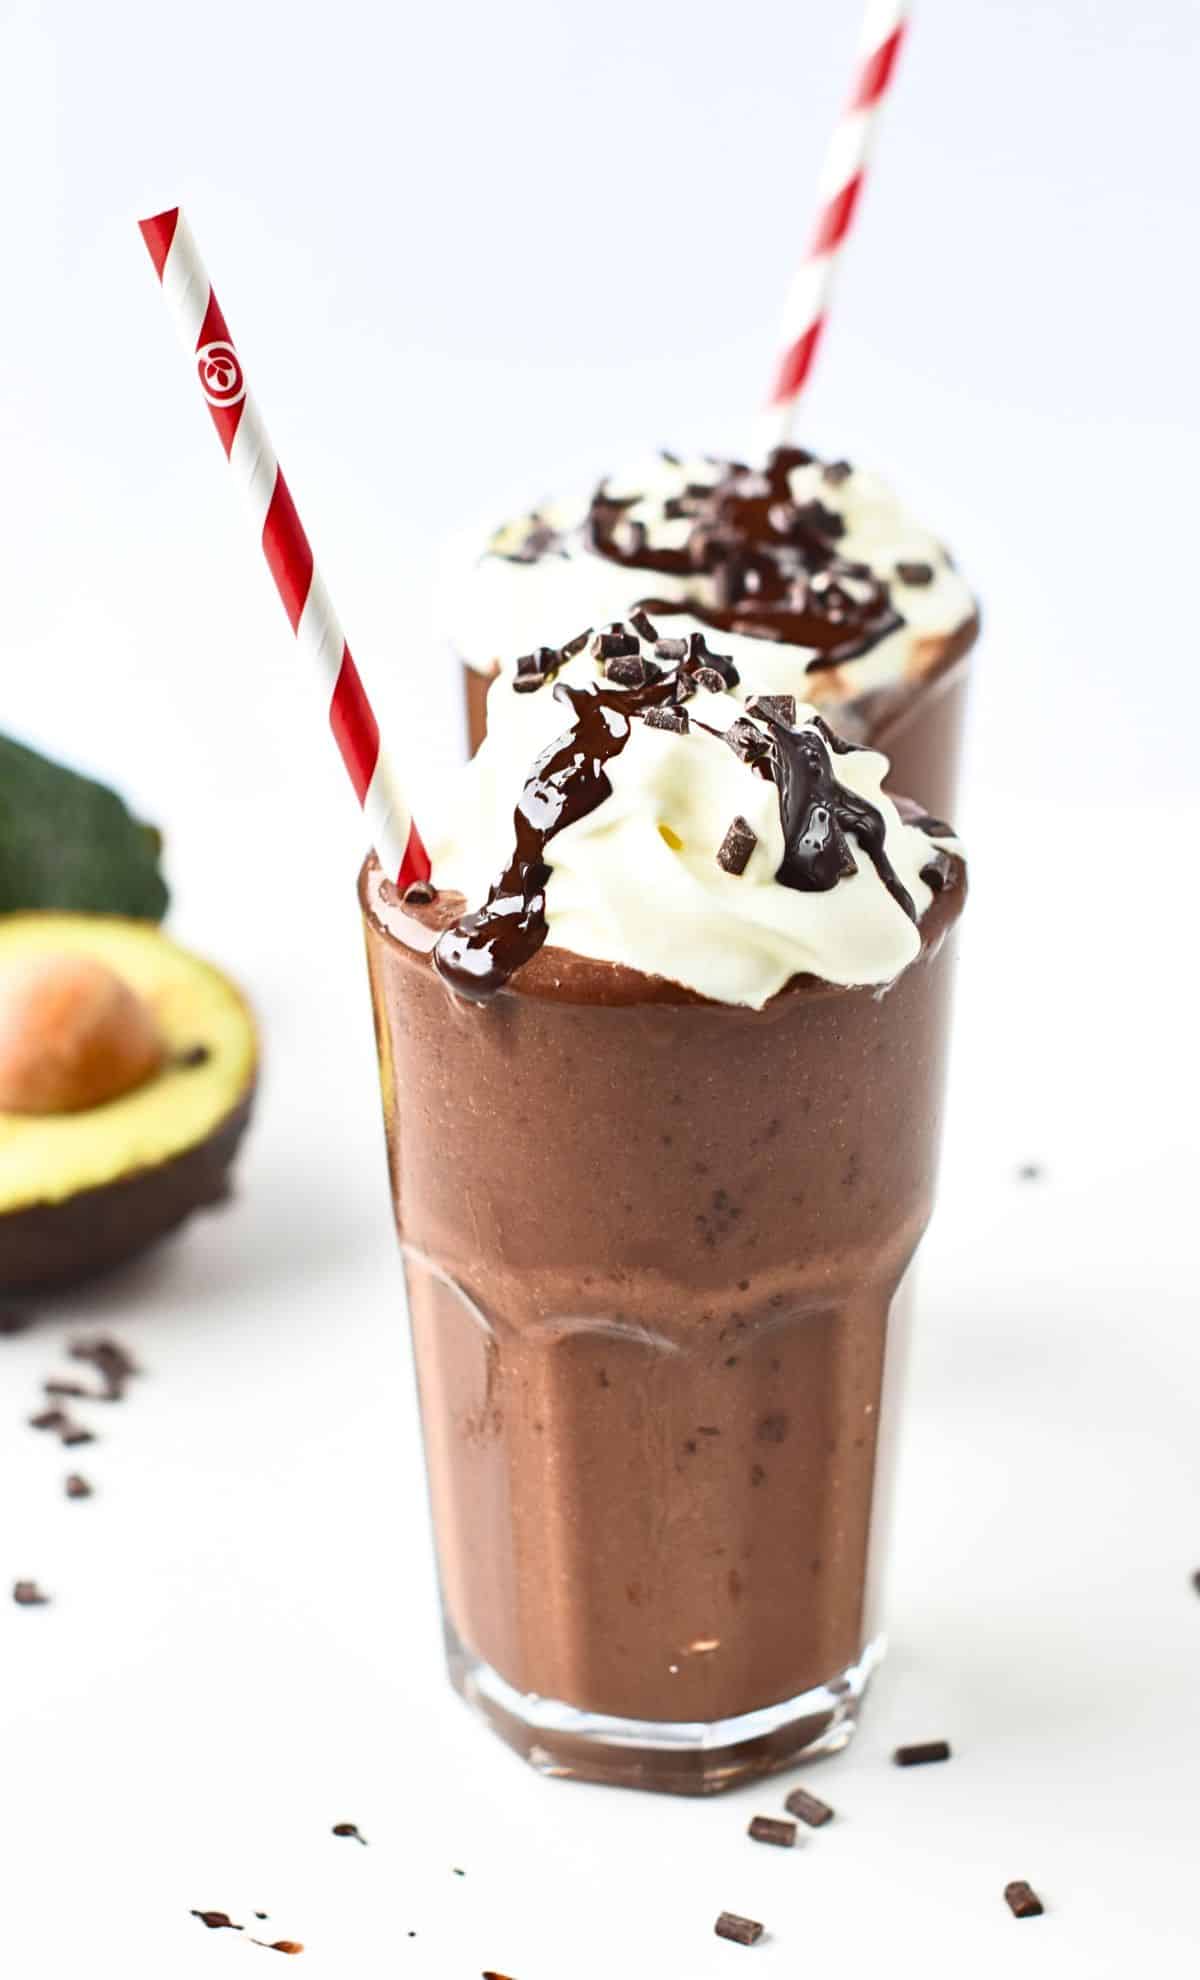 Chocolate Avocado Smoothie decorated with whipped cream, melted chocolate, and chocolate chips.